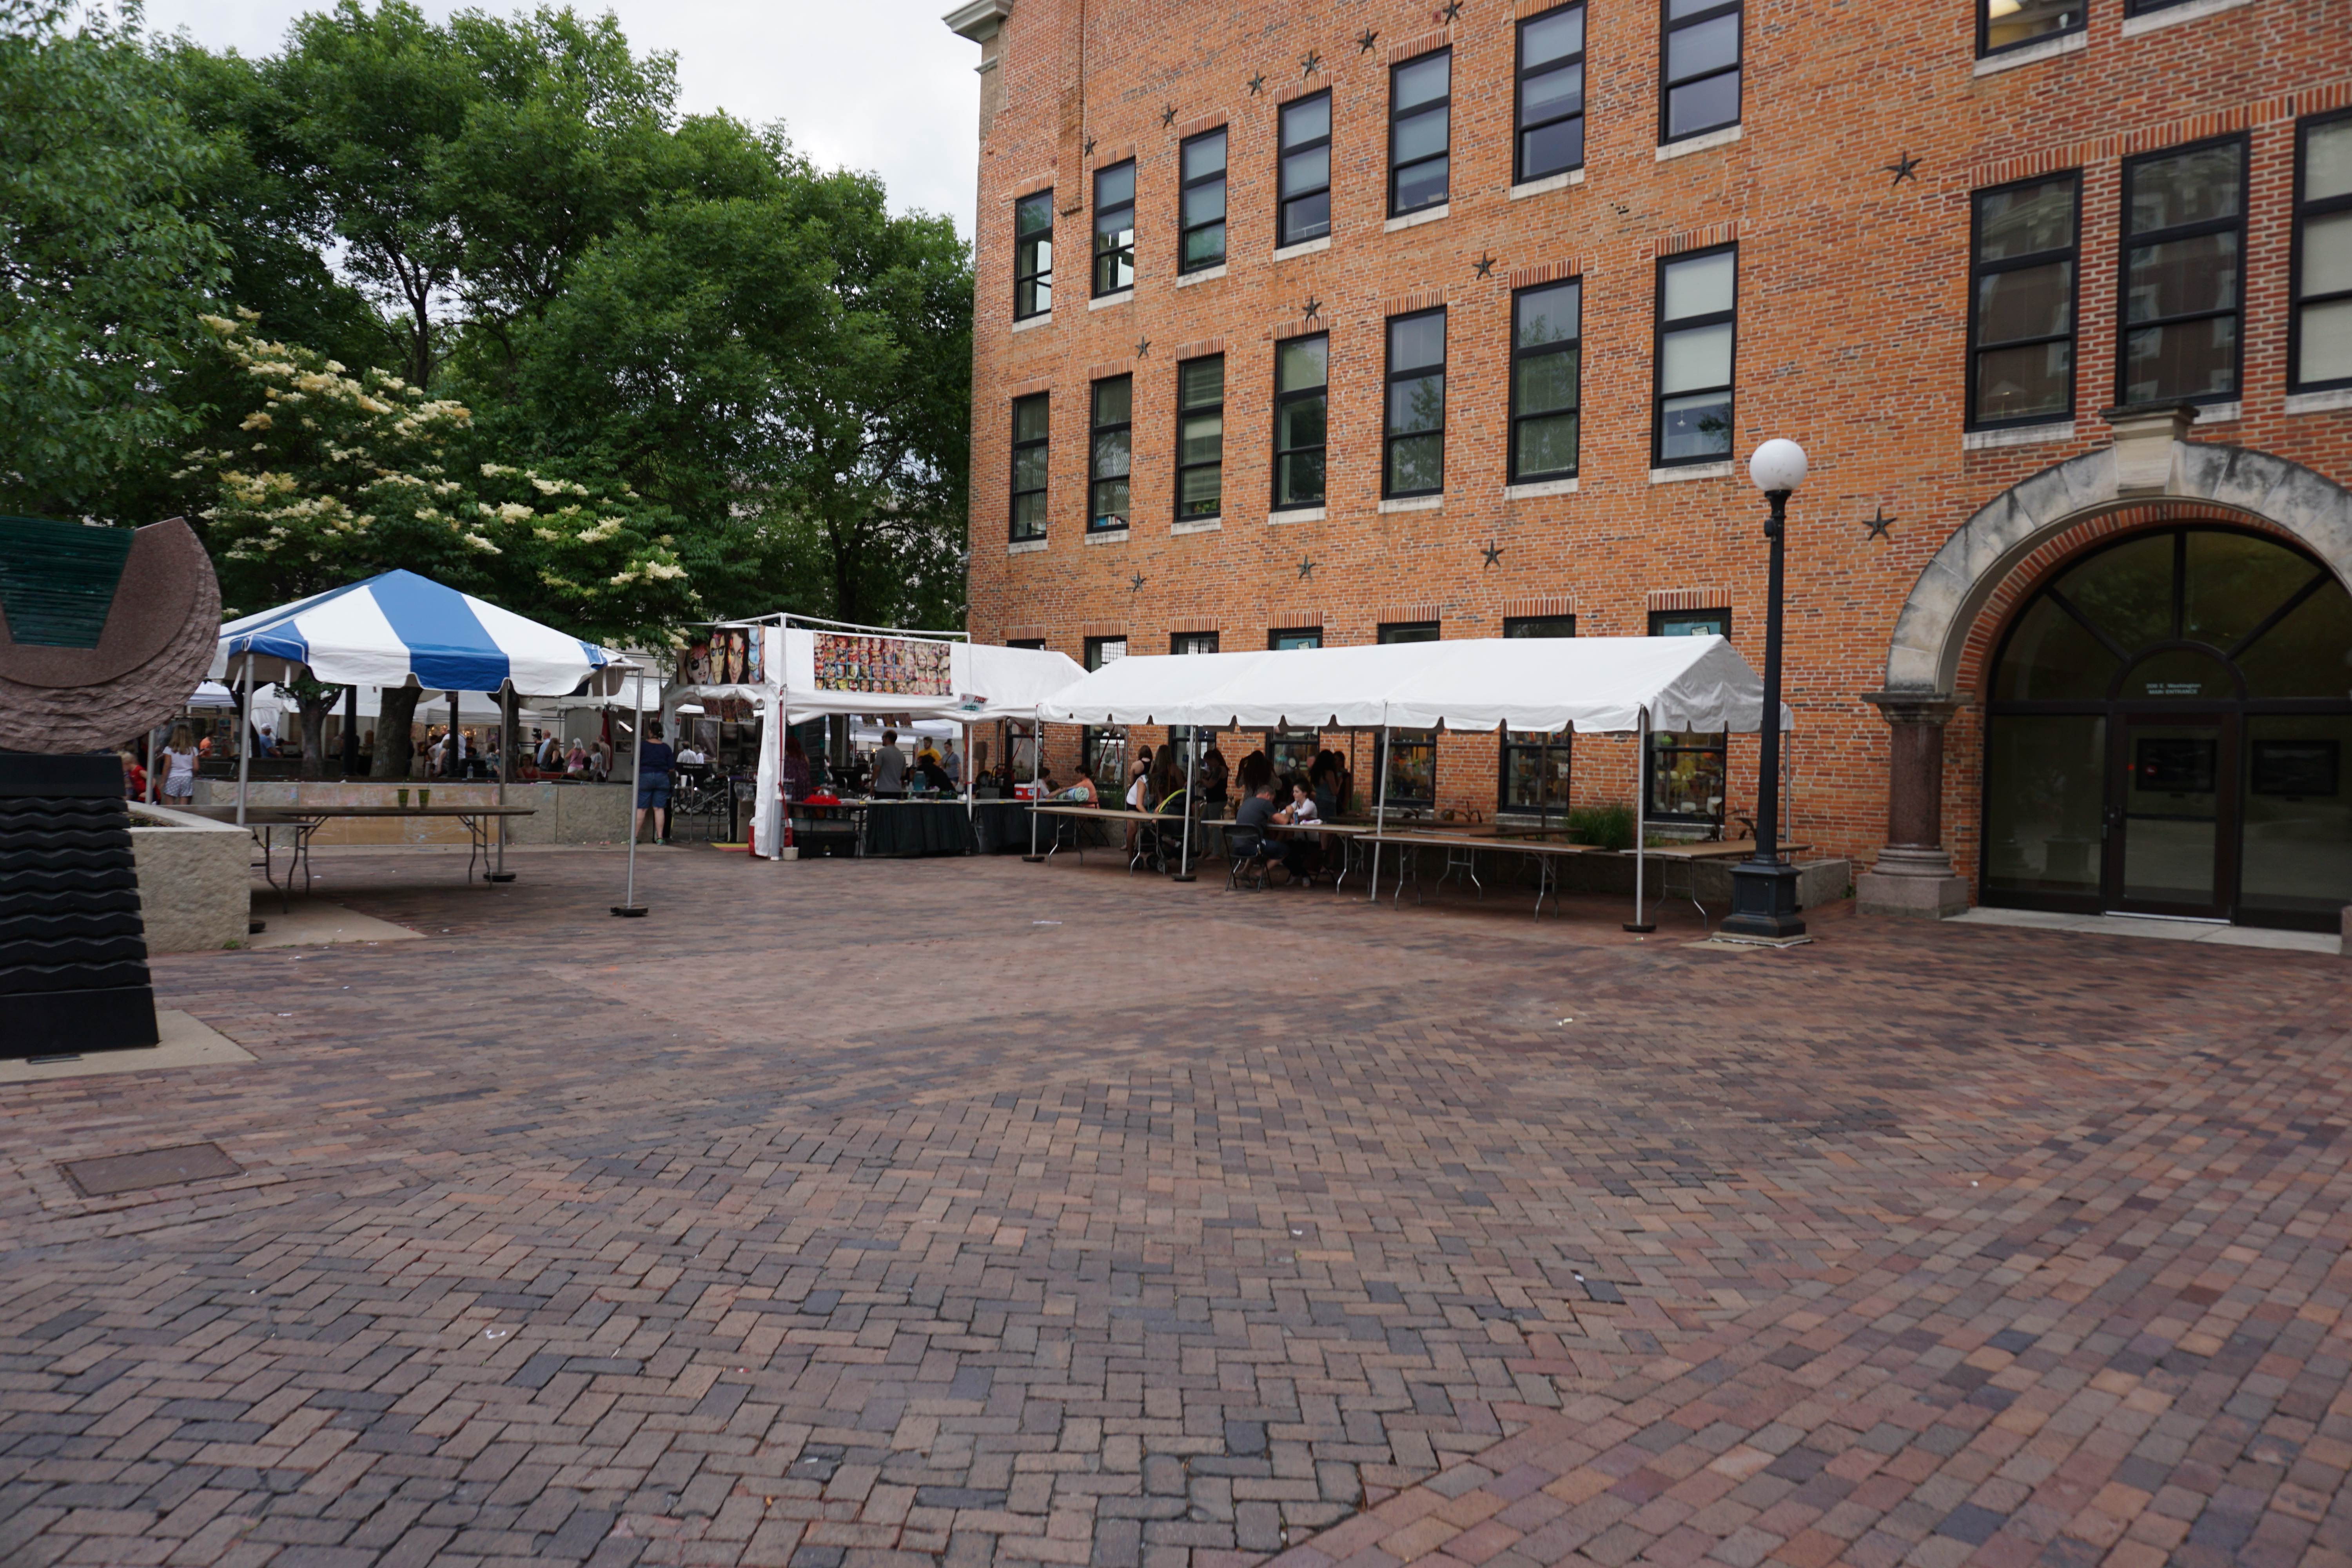 Pictures from the 2016 Iowa Arts Festival - Tents on the Ped Mall